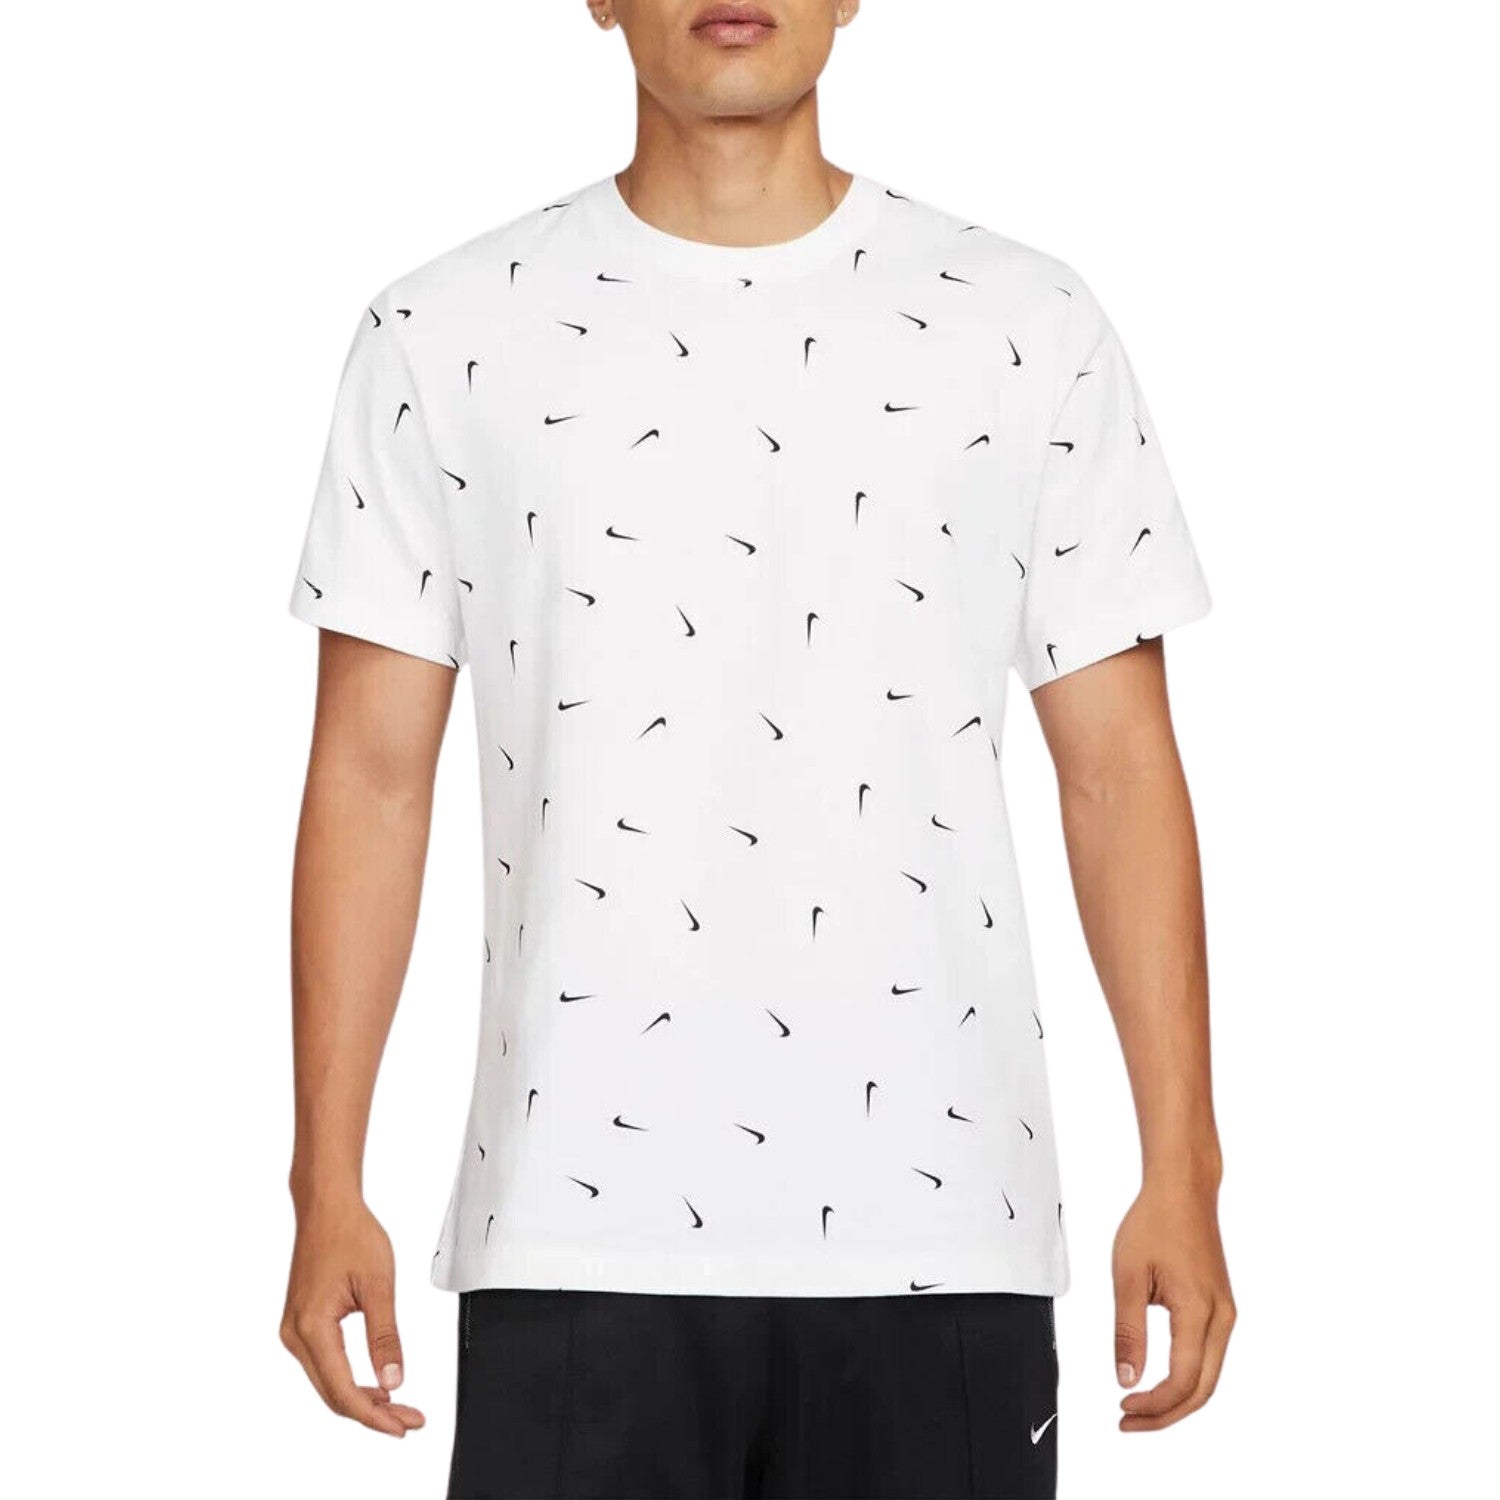 Nike Sportswear All Over Print Mens Club Tee Mens Style : Dr7909